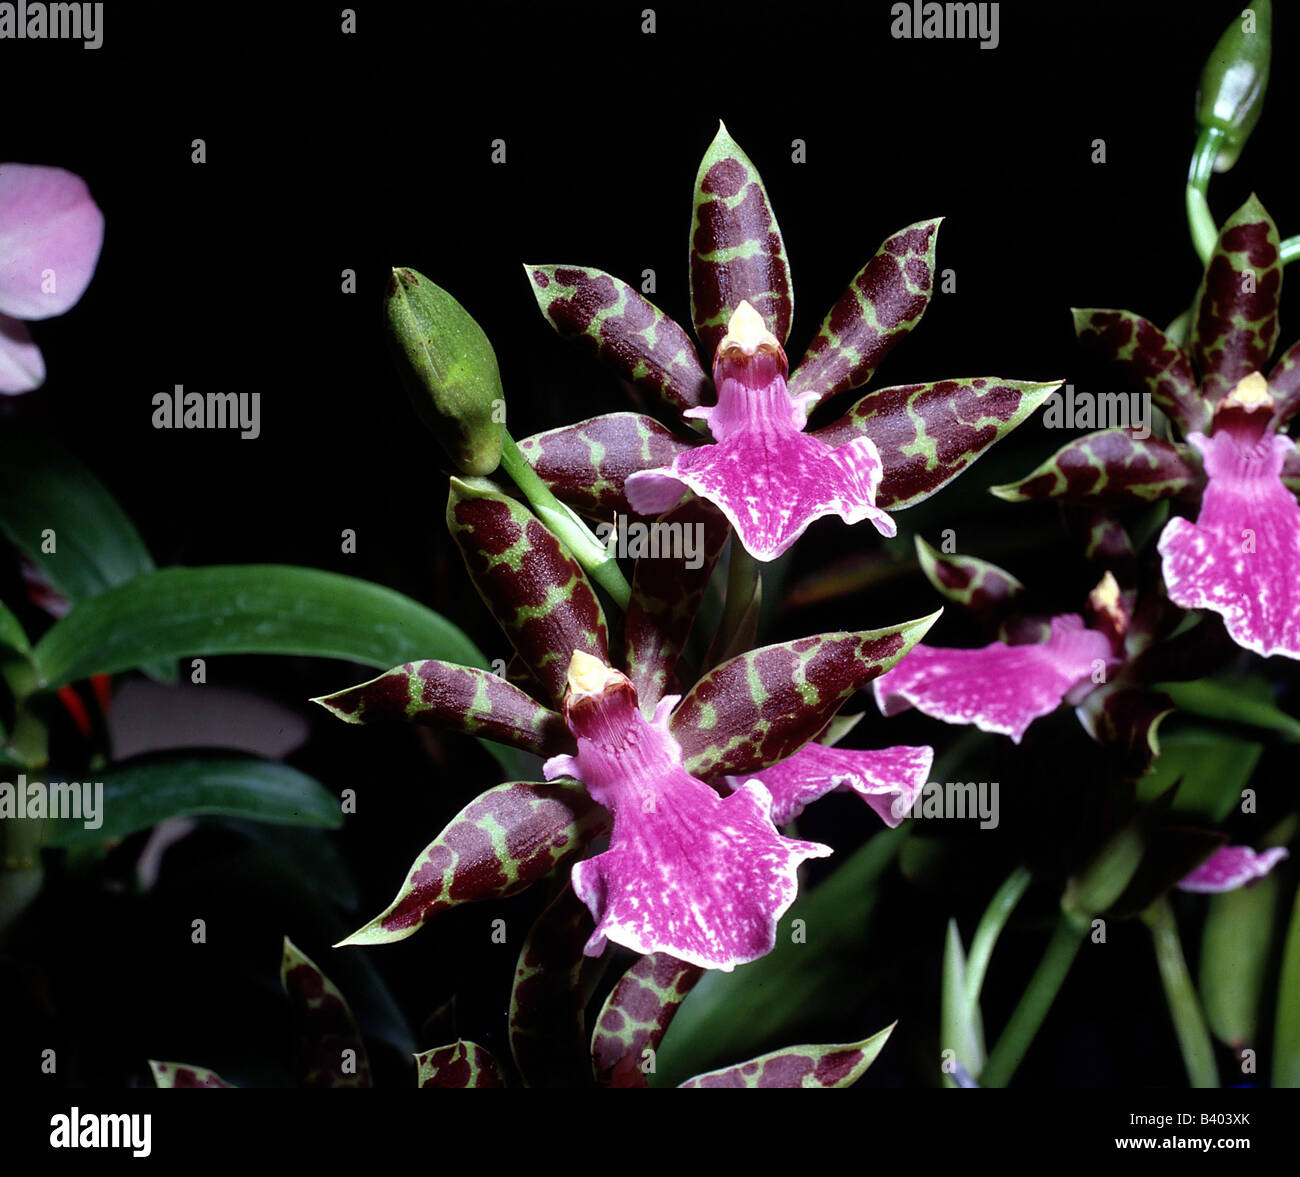 botany, Oncidium, Oncidium, blossoms, dotted, speckled, spotted, stamen, red, blooming, flowering, orchid, blossom, Liliidae, Or Stock Photo